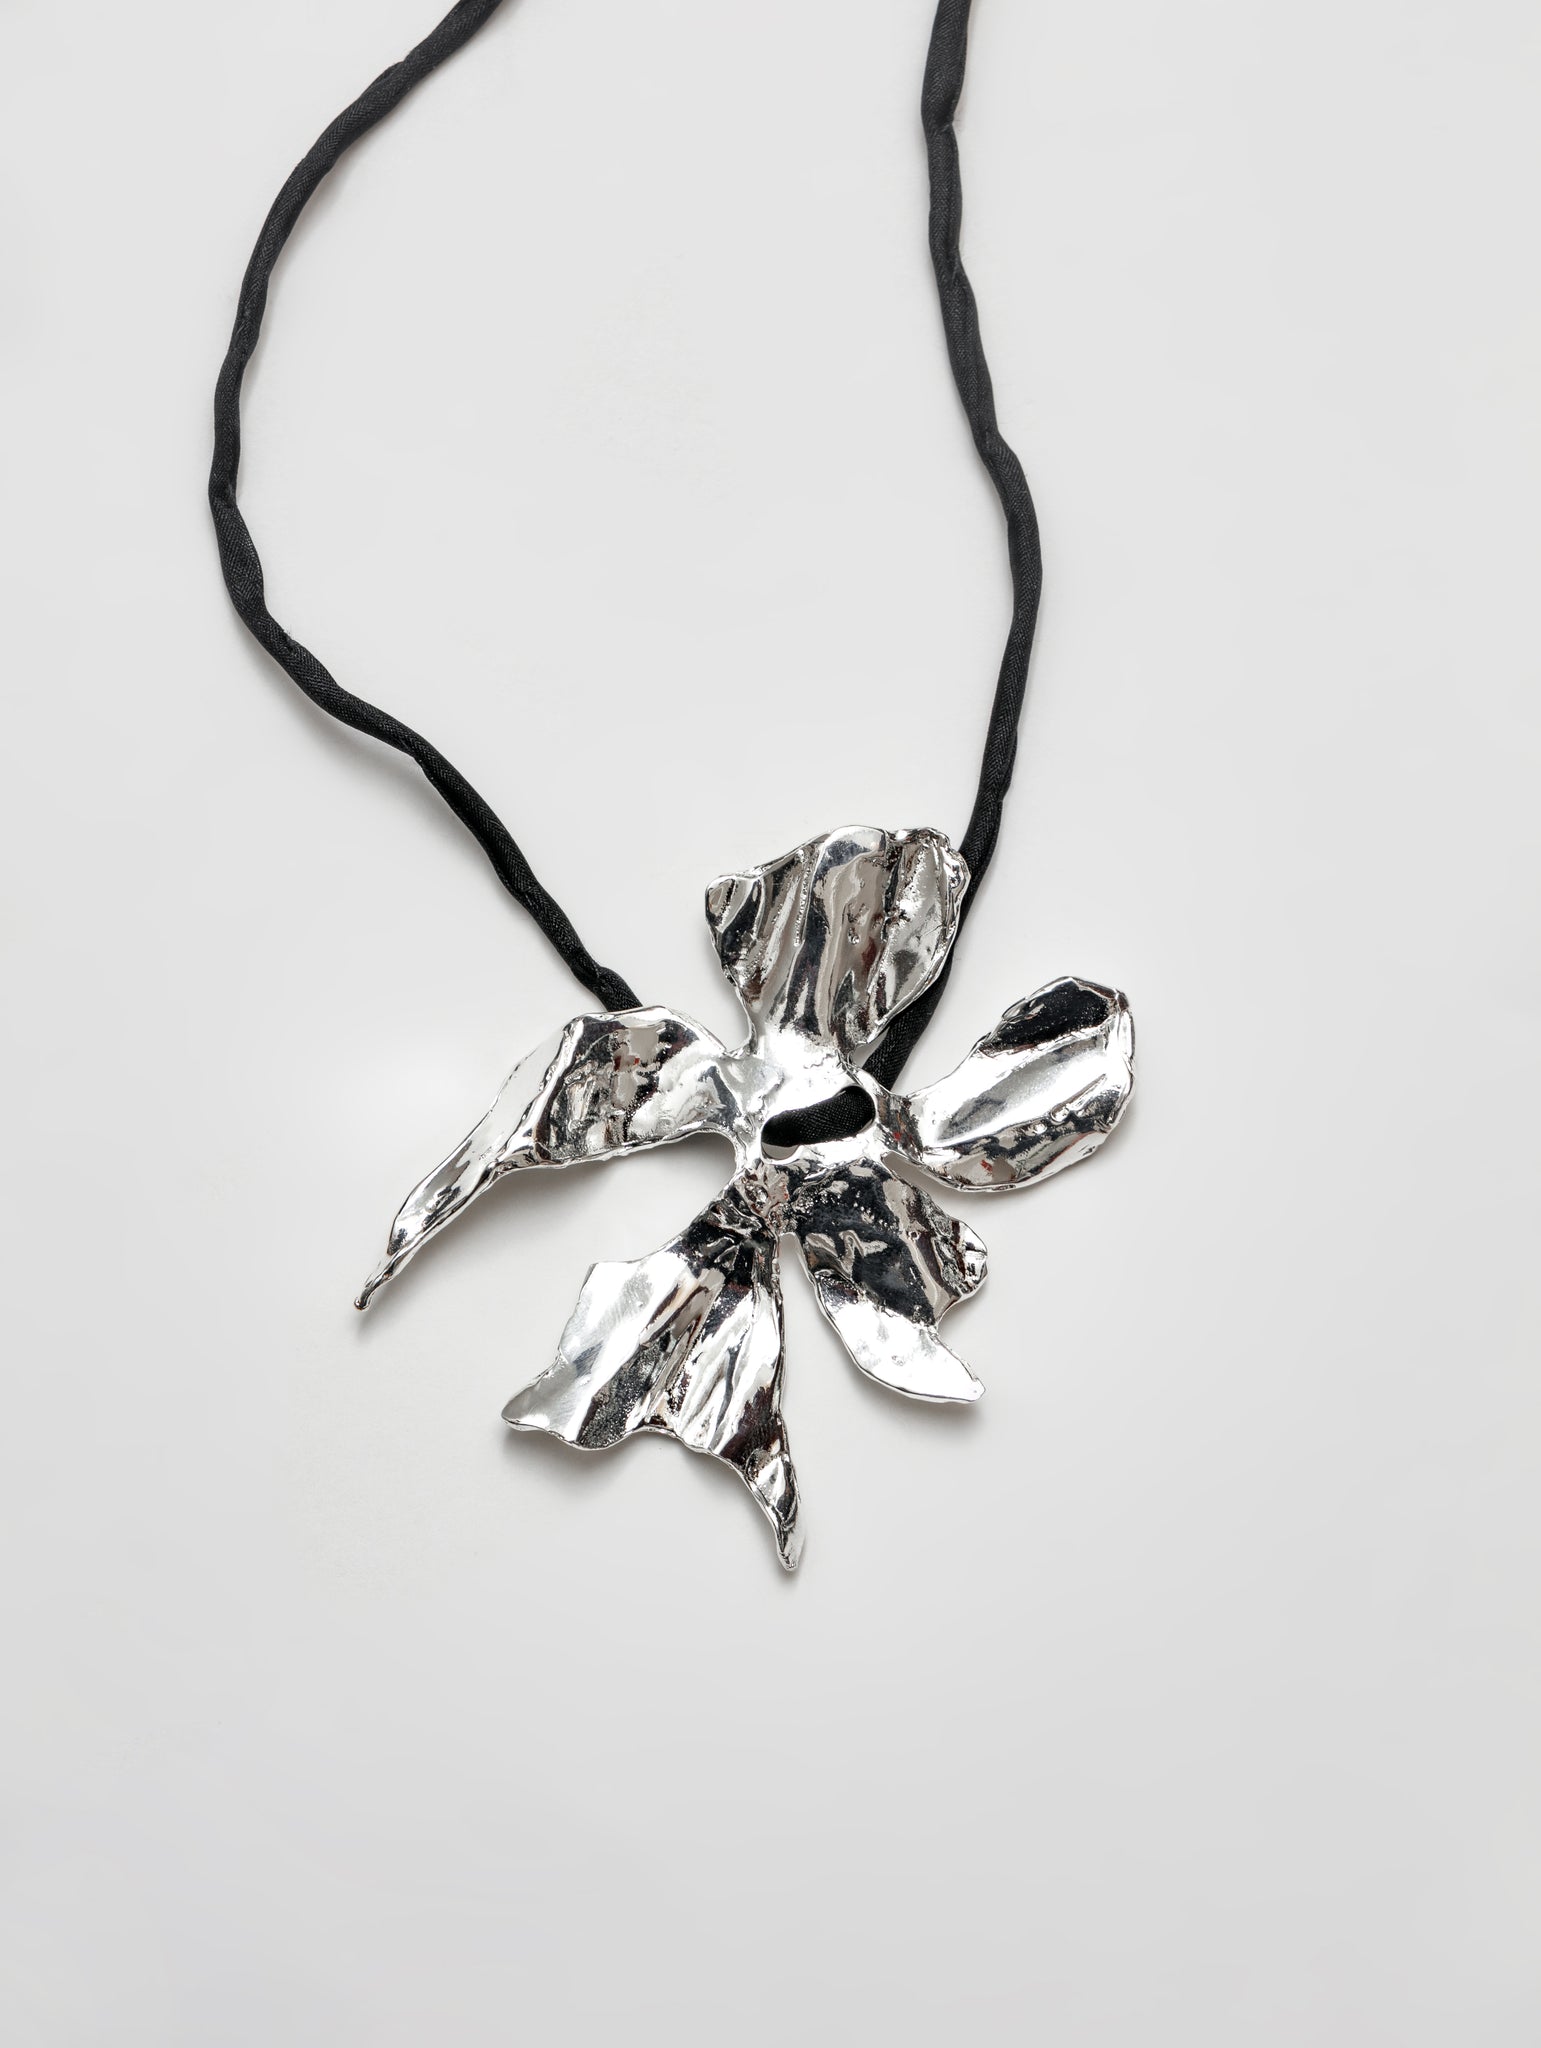 Wolf Circus Flower Silk Cord Necklace in Black | Silver Plated Flower Pendant Choker-Necklaces-wolfcircus.com